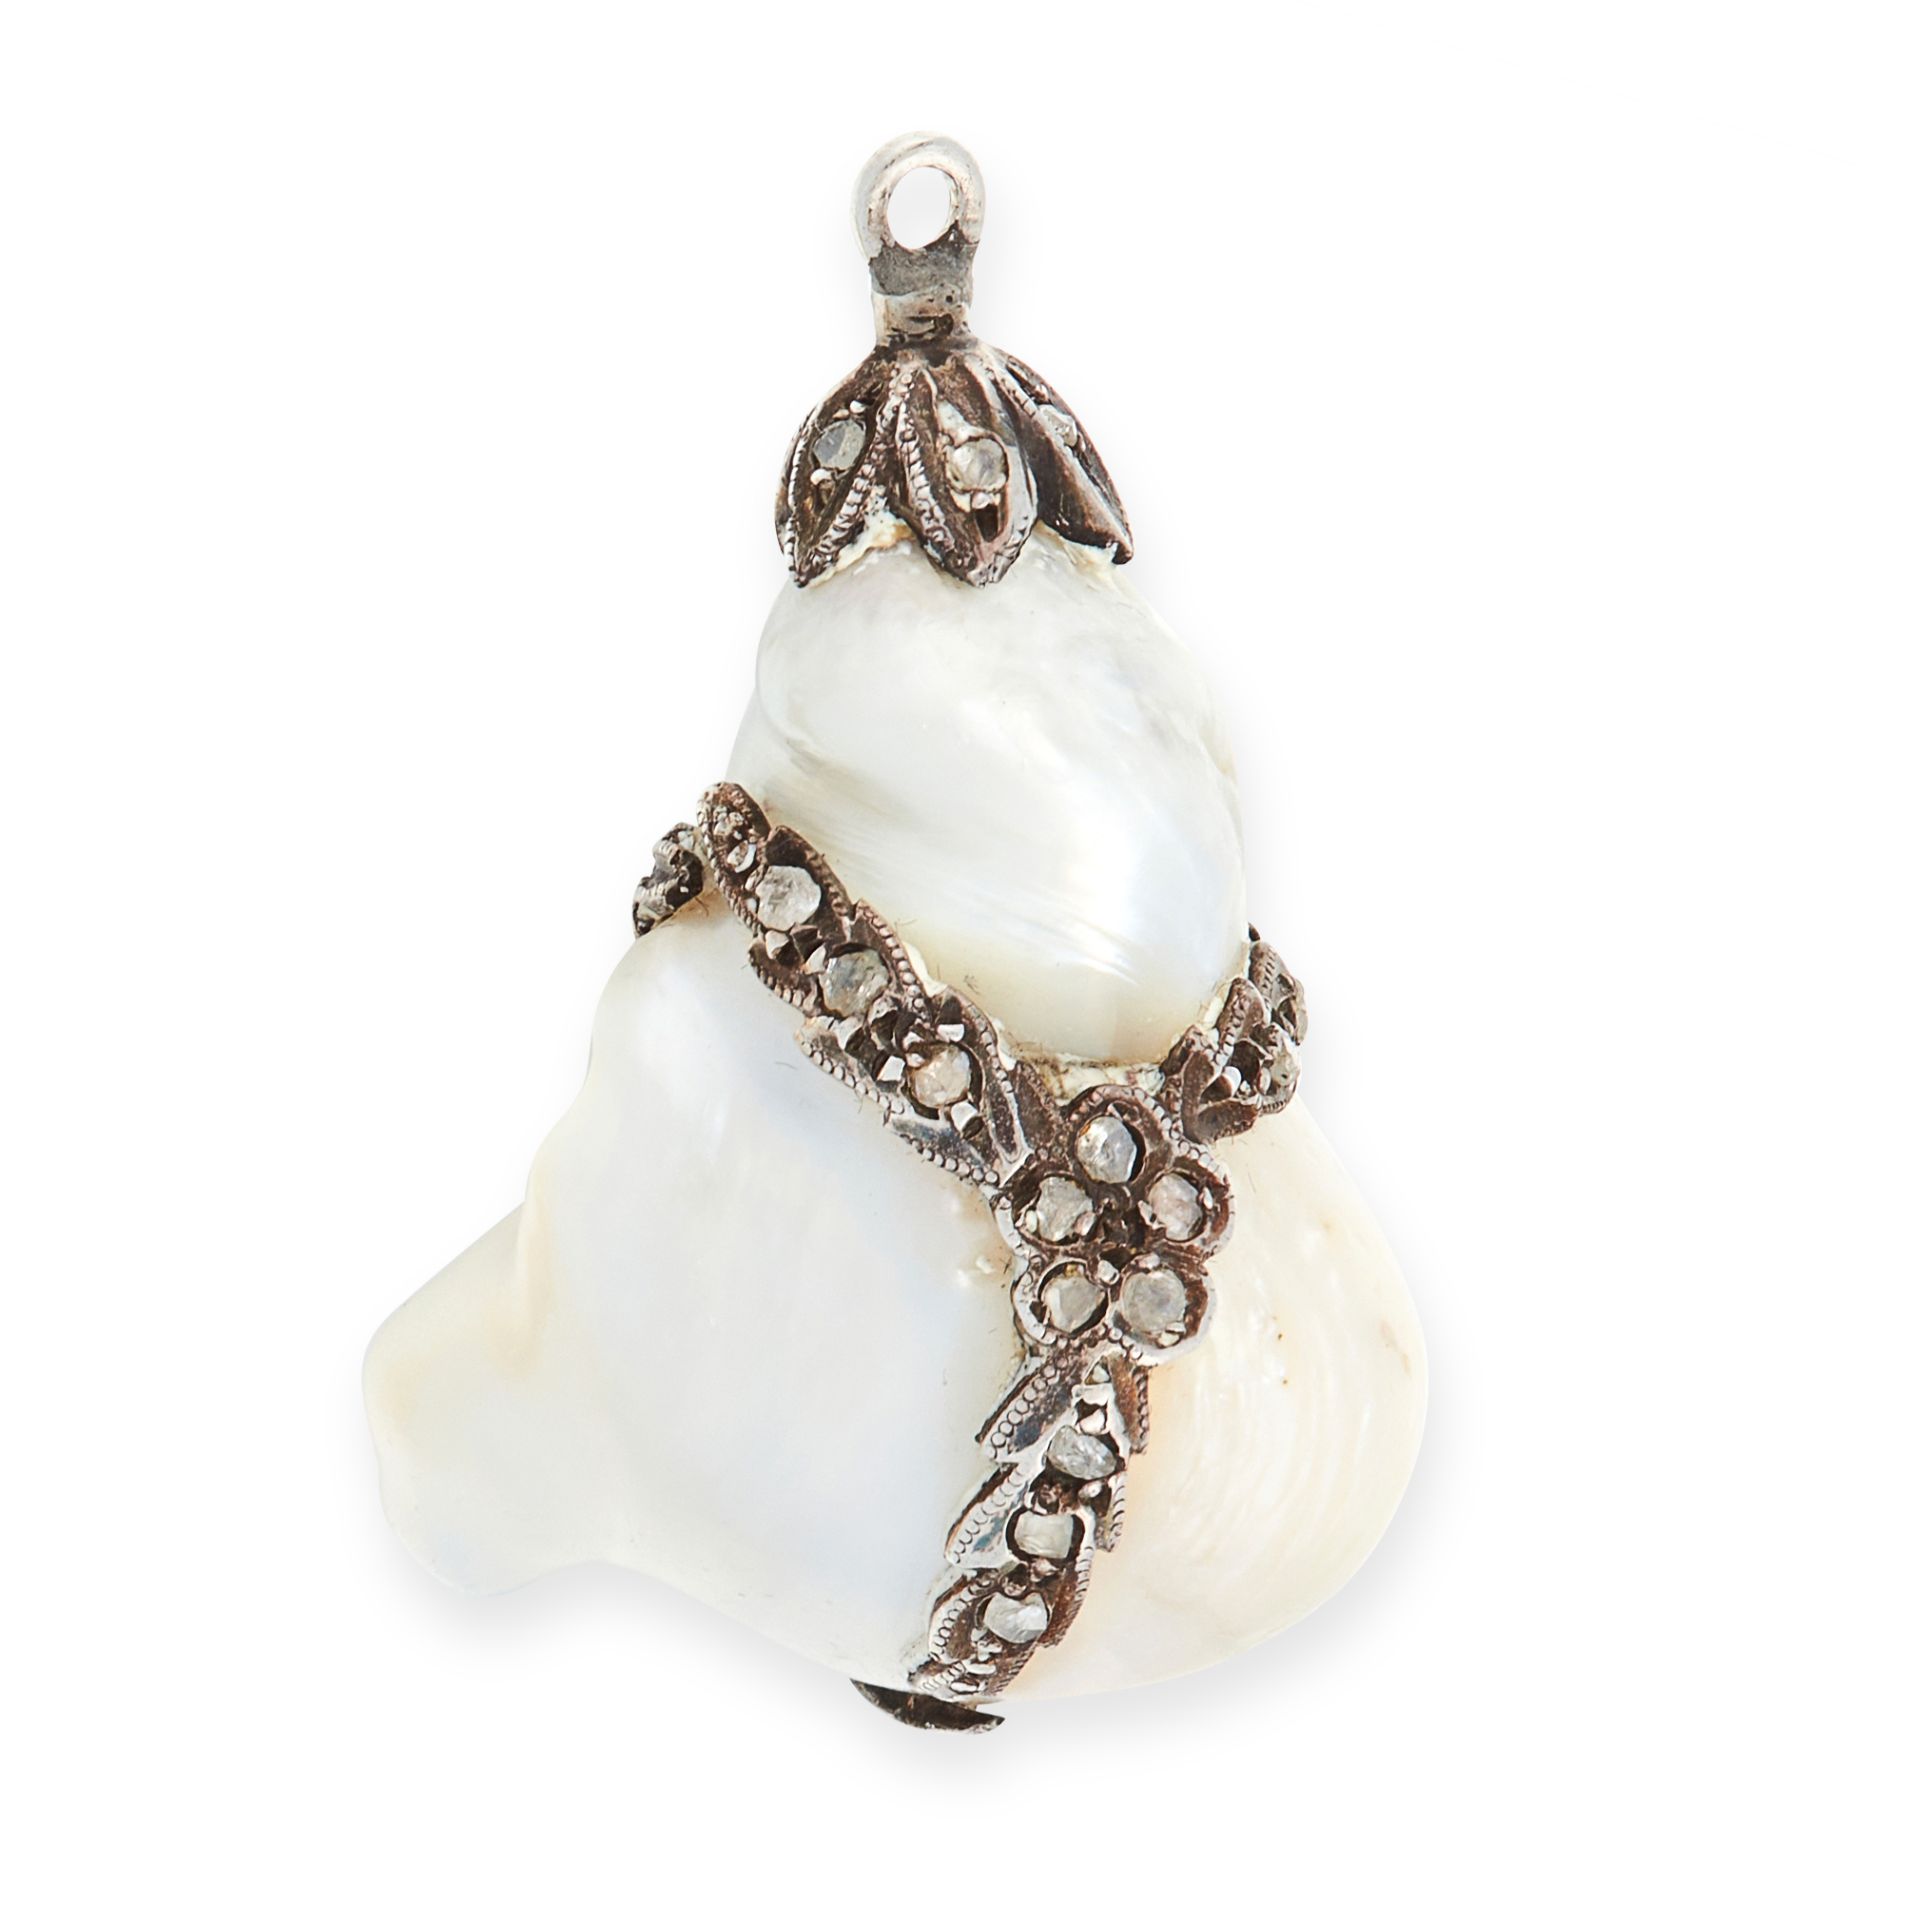 NATURAL PEARL AND DIAMOND PENDANT in silver, formed of a trio of blister pearls set together